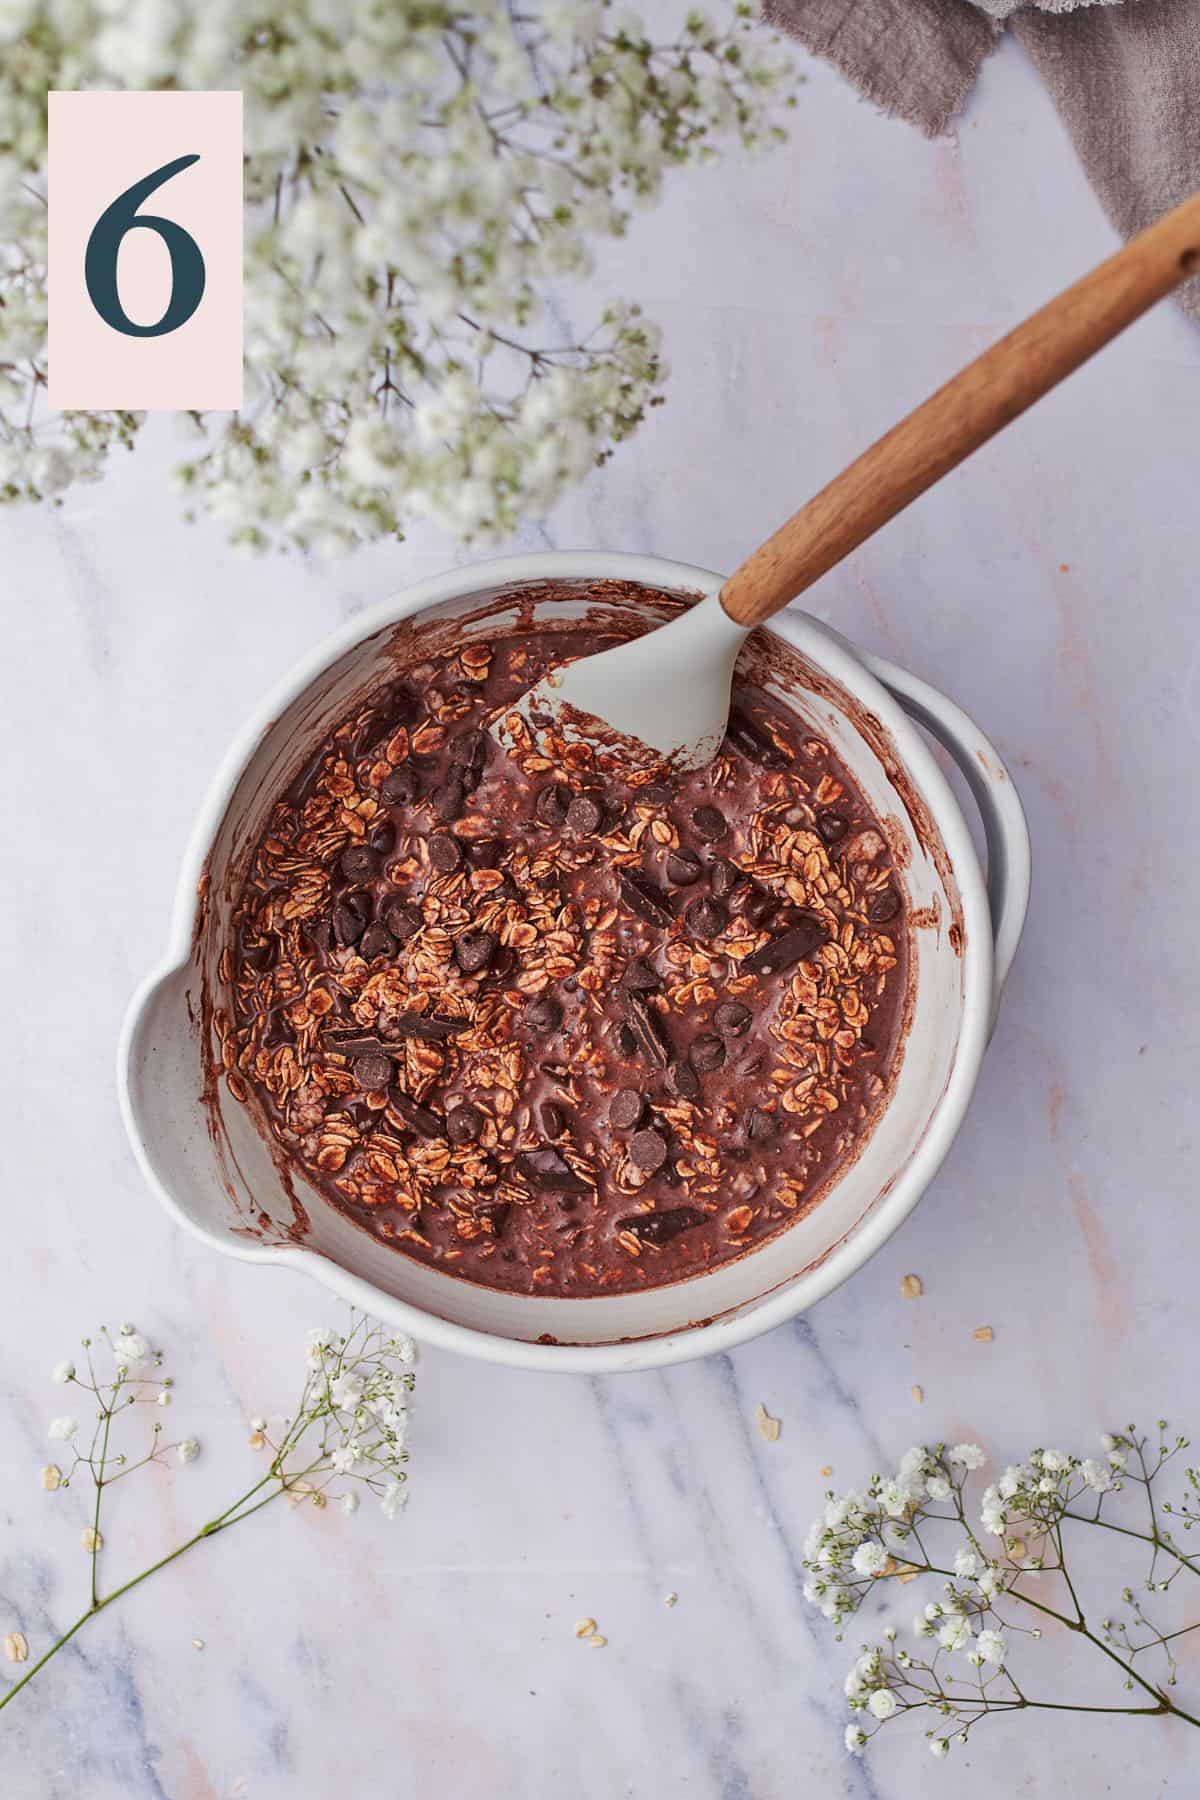 combined ingredients to make chocolate baked oats with chunks of chocolate in a mixing bowl with a rubber spatula.